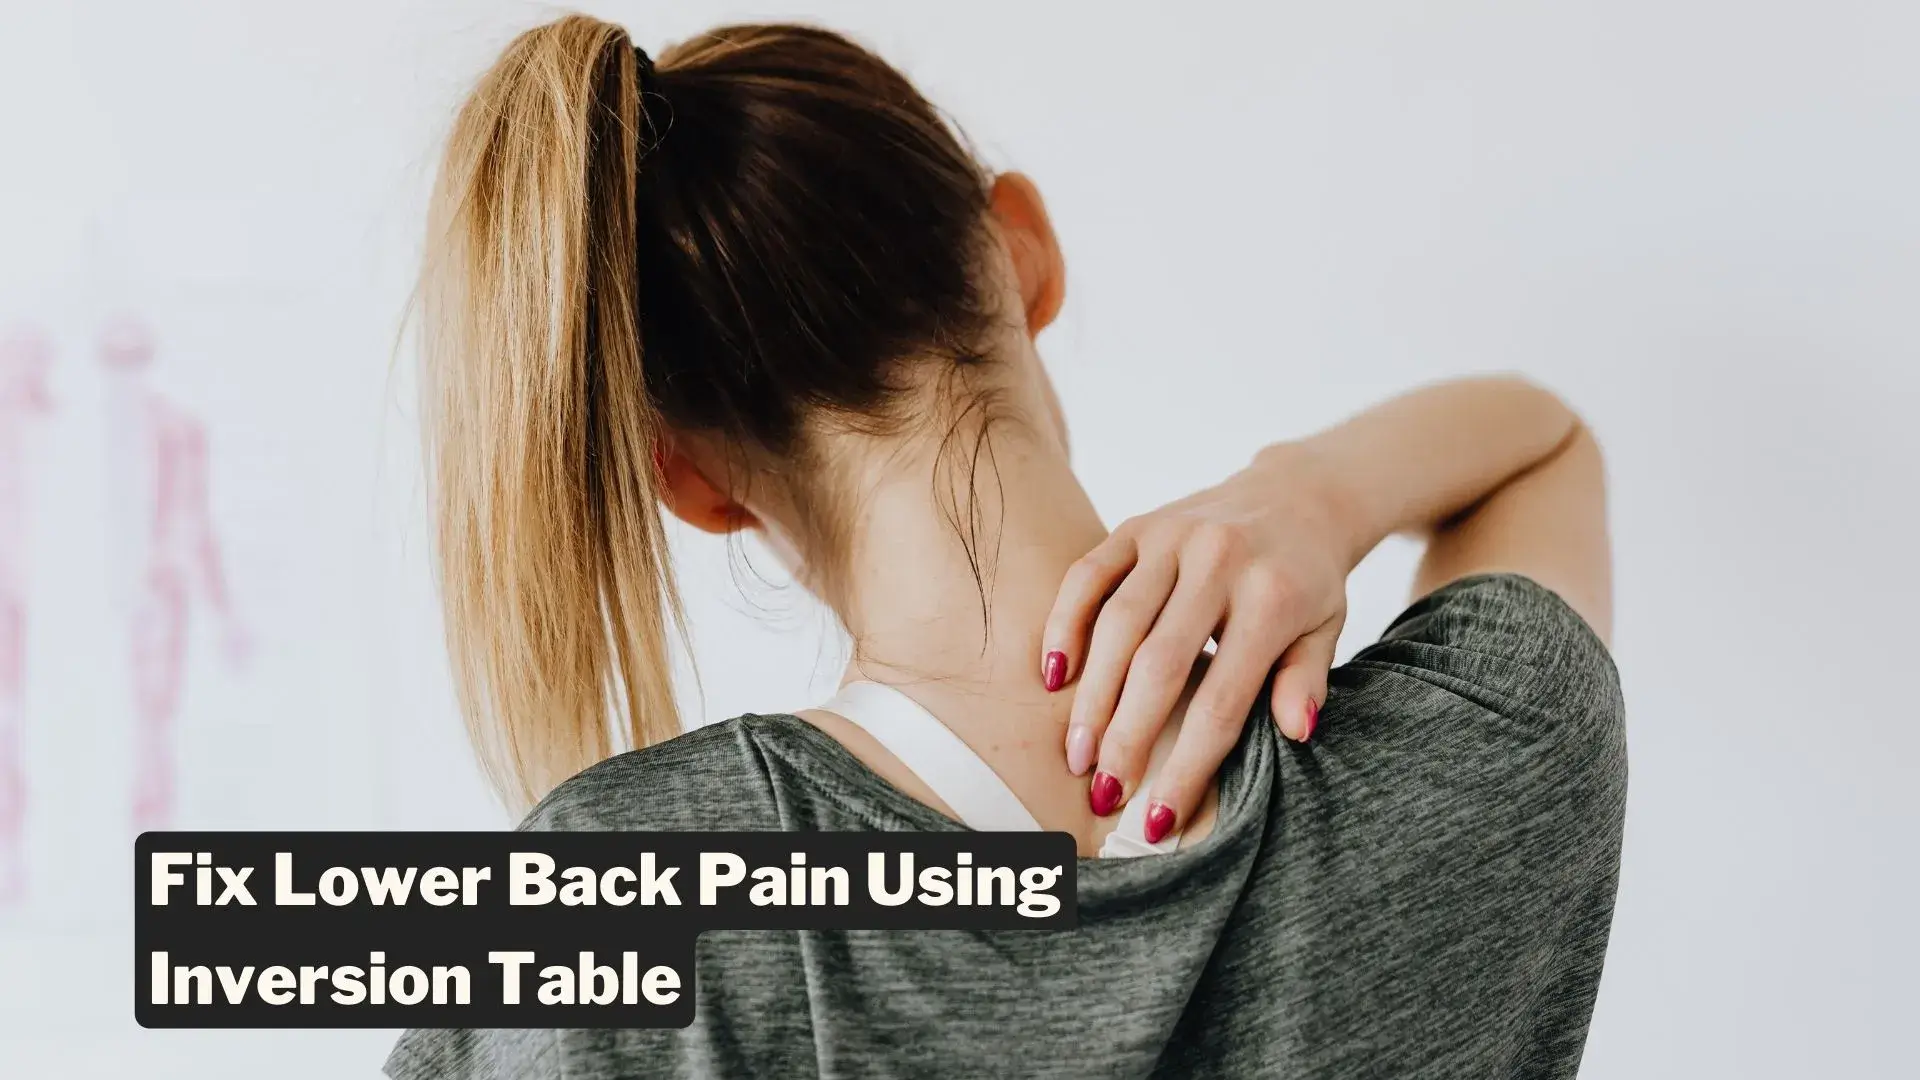 Complete Guide To Inversion Tables For Lower Back Pain